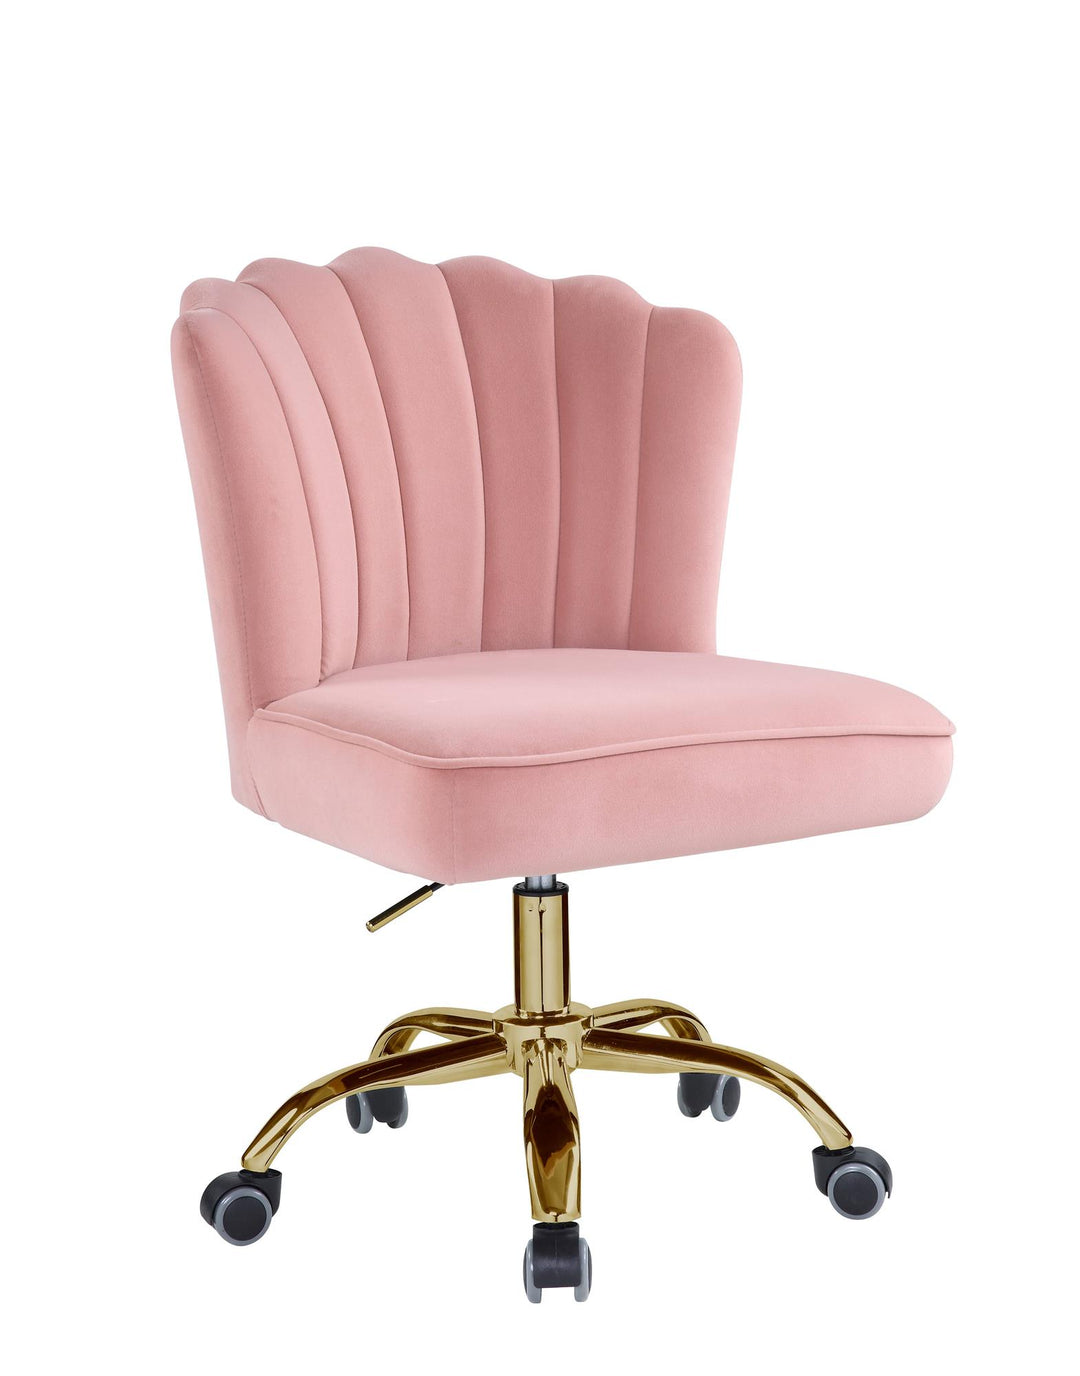 Stylish Velvet Office Chair with caster wheels - Pink